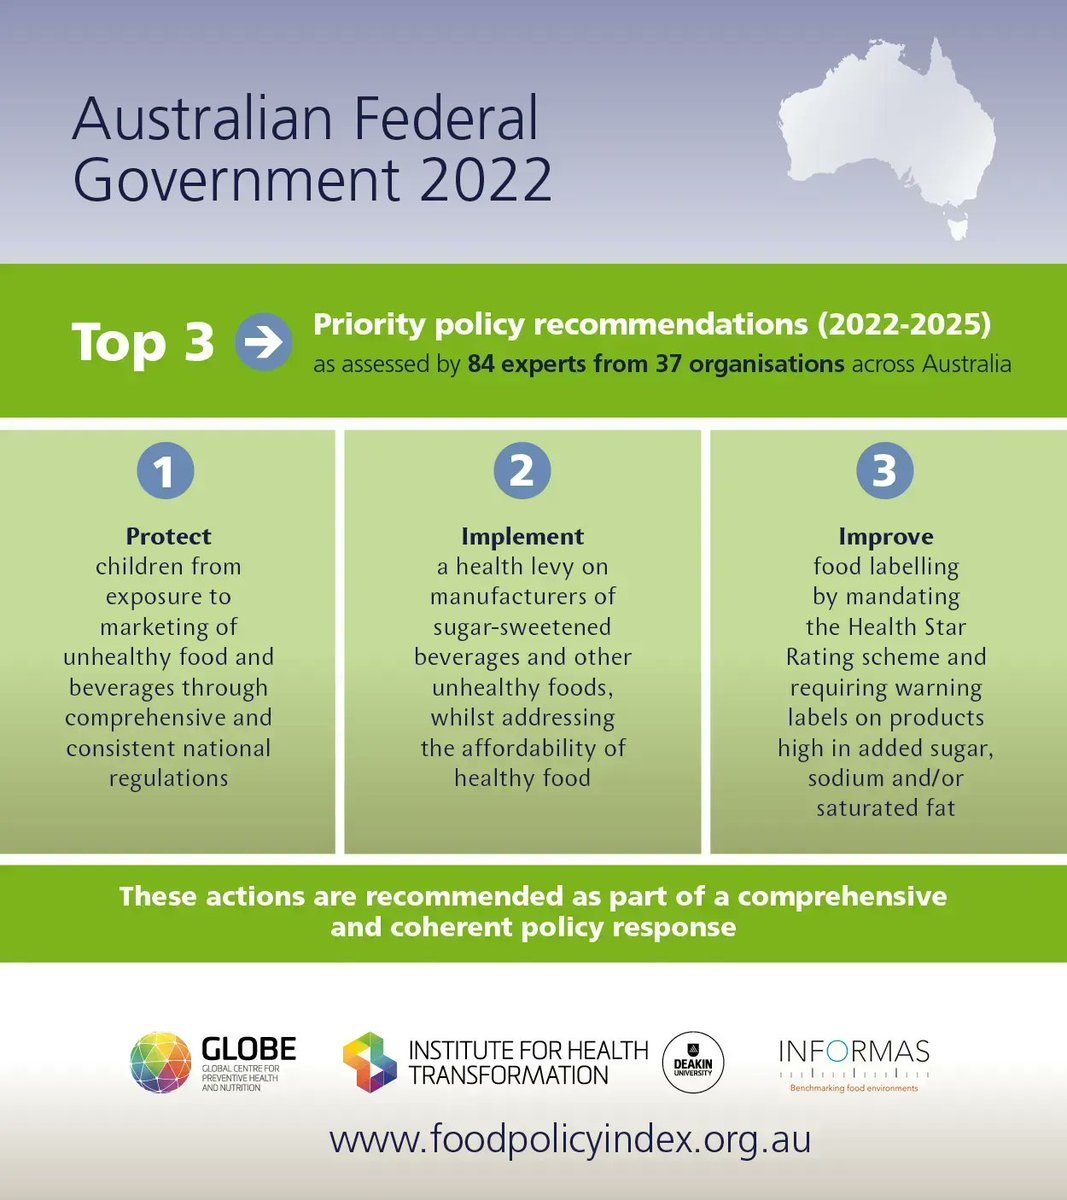 Experts including @gary_sacks from @GLOBE_Deakin and @IHT_Deakin together with 84 experts from 37 organisations across Australia, identified Australia is lagging in the fight to tackle obesity, the Food Policy Index report found. Full story: buff.ly/3yYKTyc